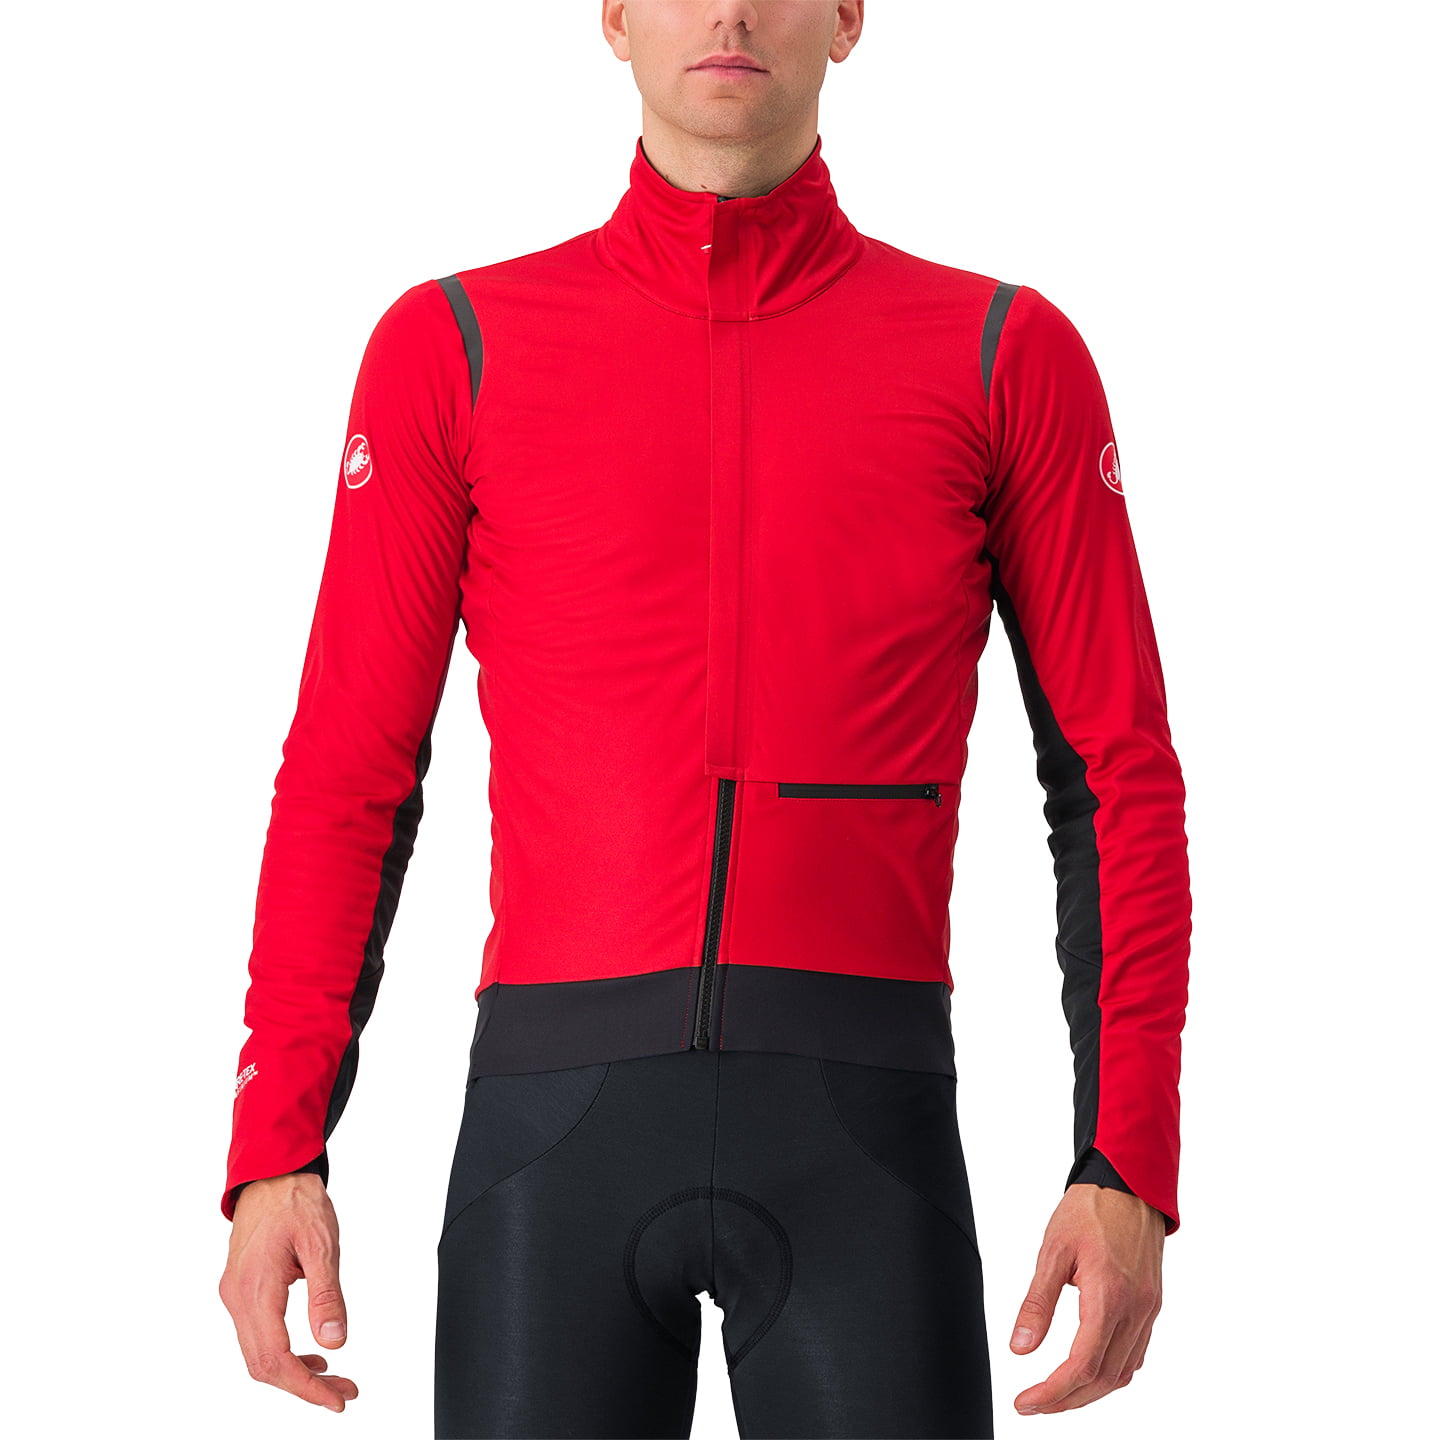 CASTELLI Winter Jacket Alpha Doppio RoS Thermal Jacket, for men, size XL, Cycle jacket, Cycle gear